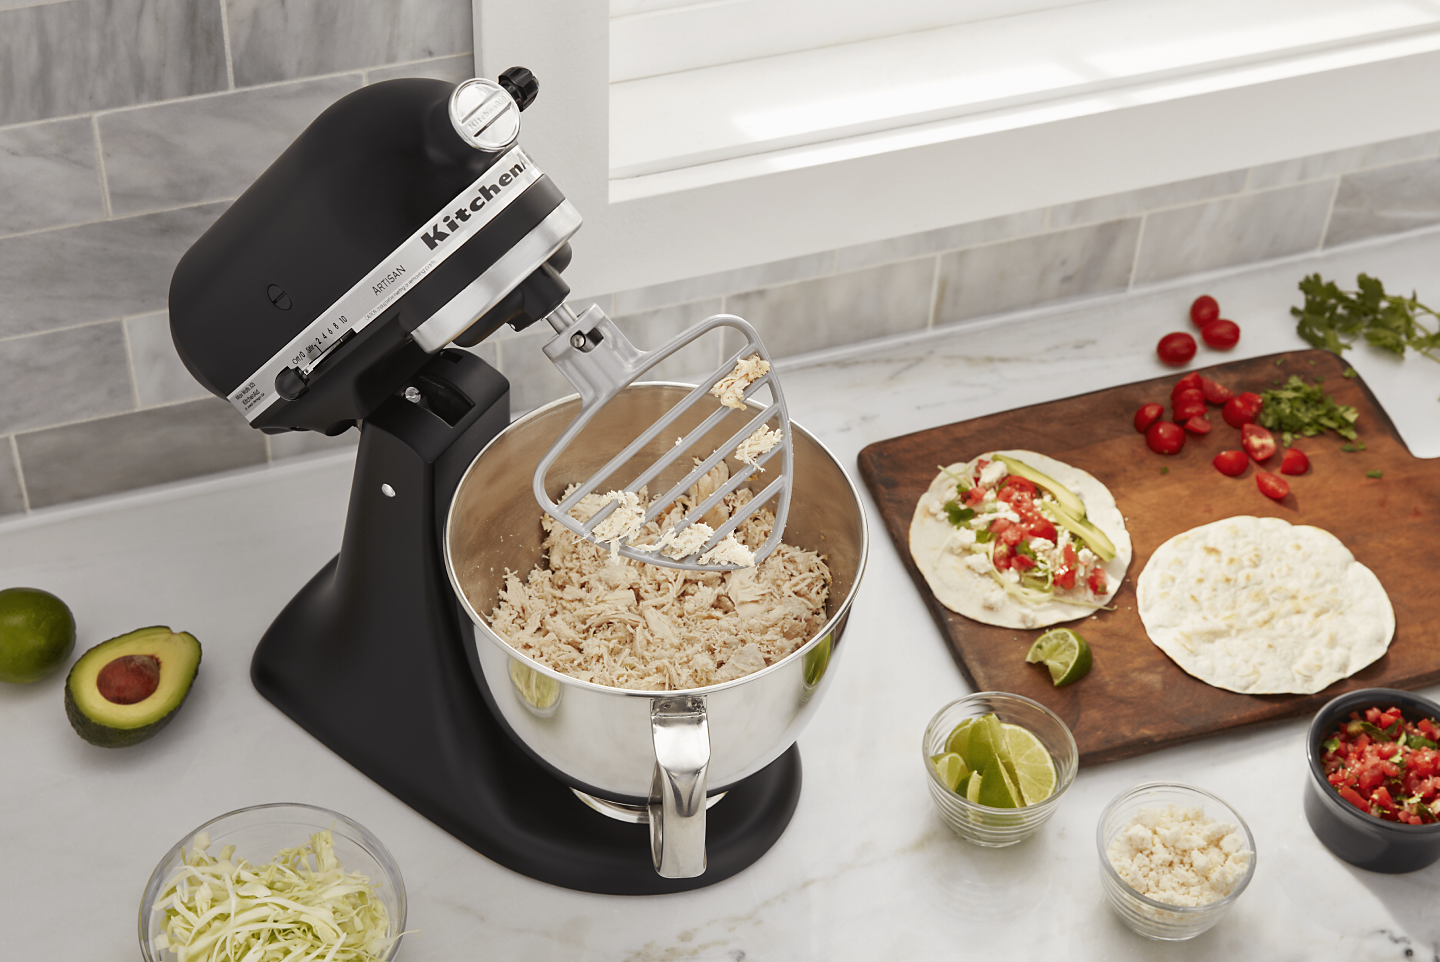 Black KitchenAid® Stand Mixer shredding chicken using the paddle attachment while surrounded by tortillas, salsa and taco fixings on a counter 